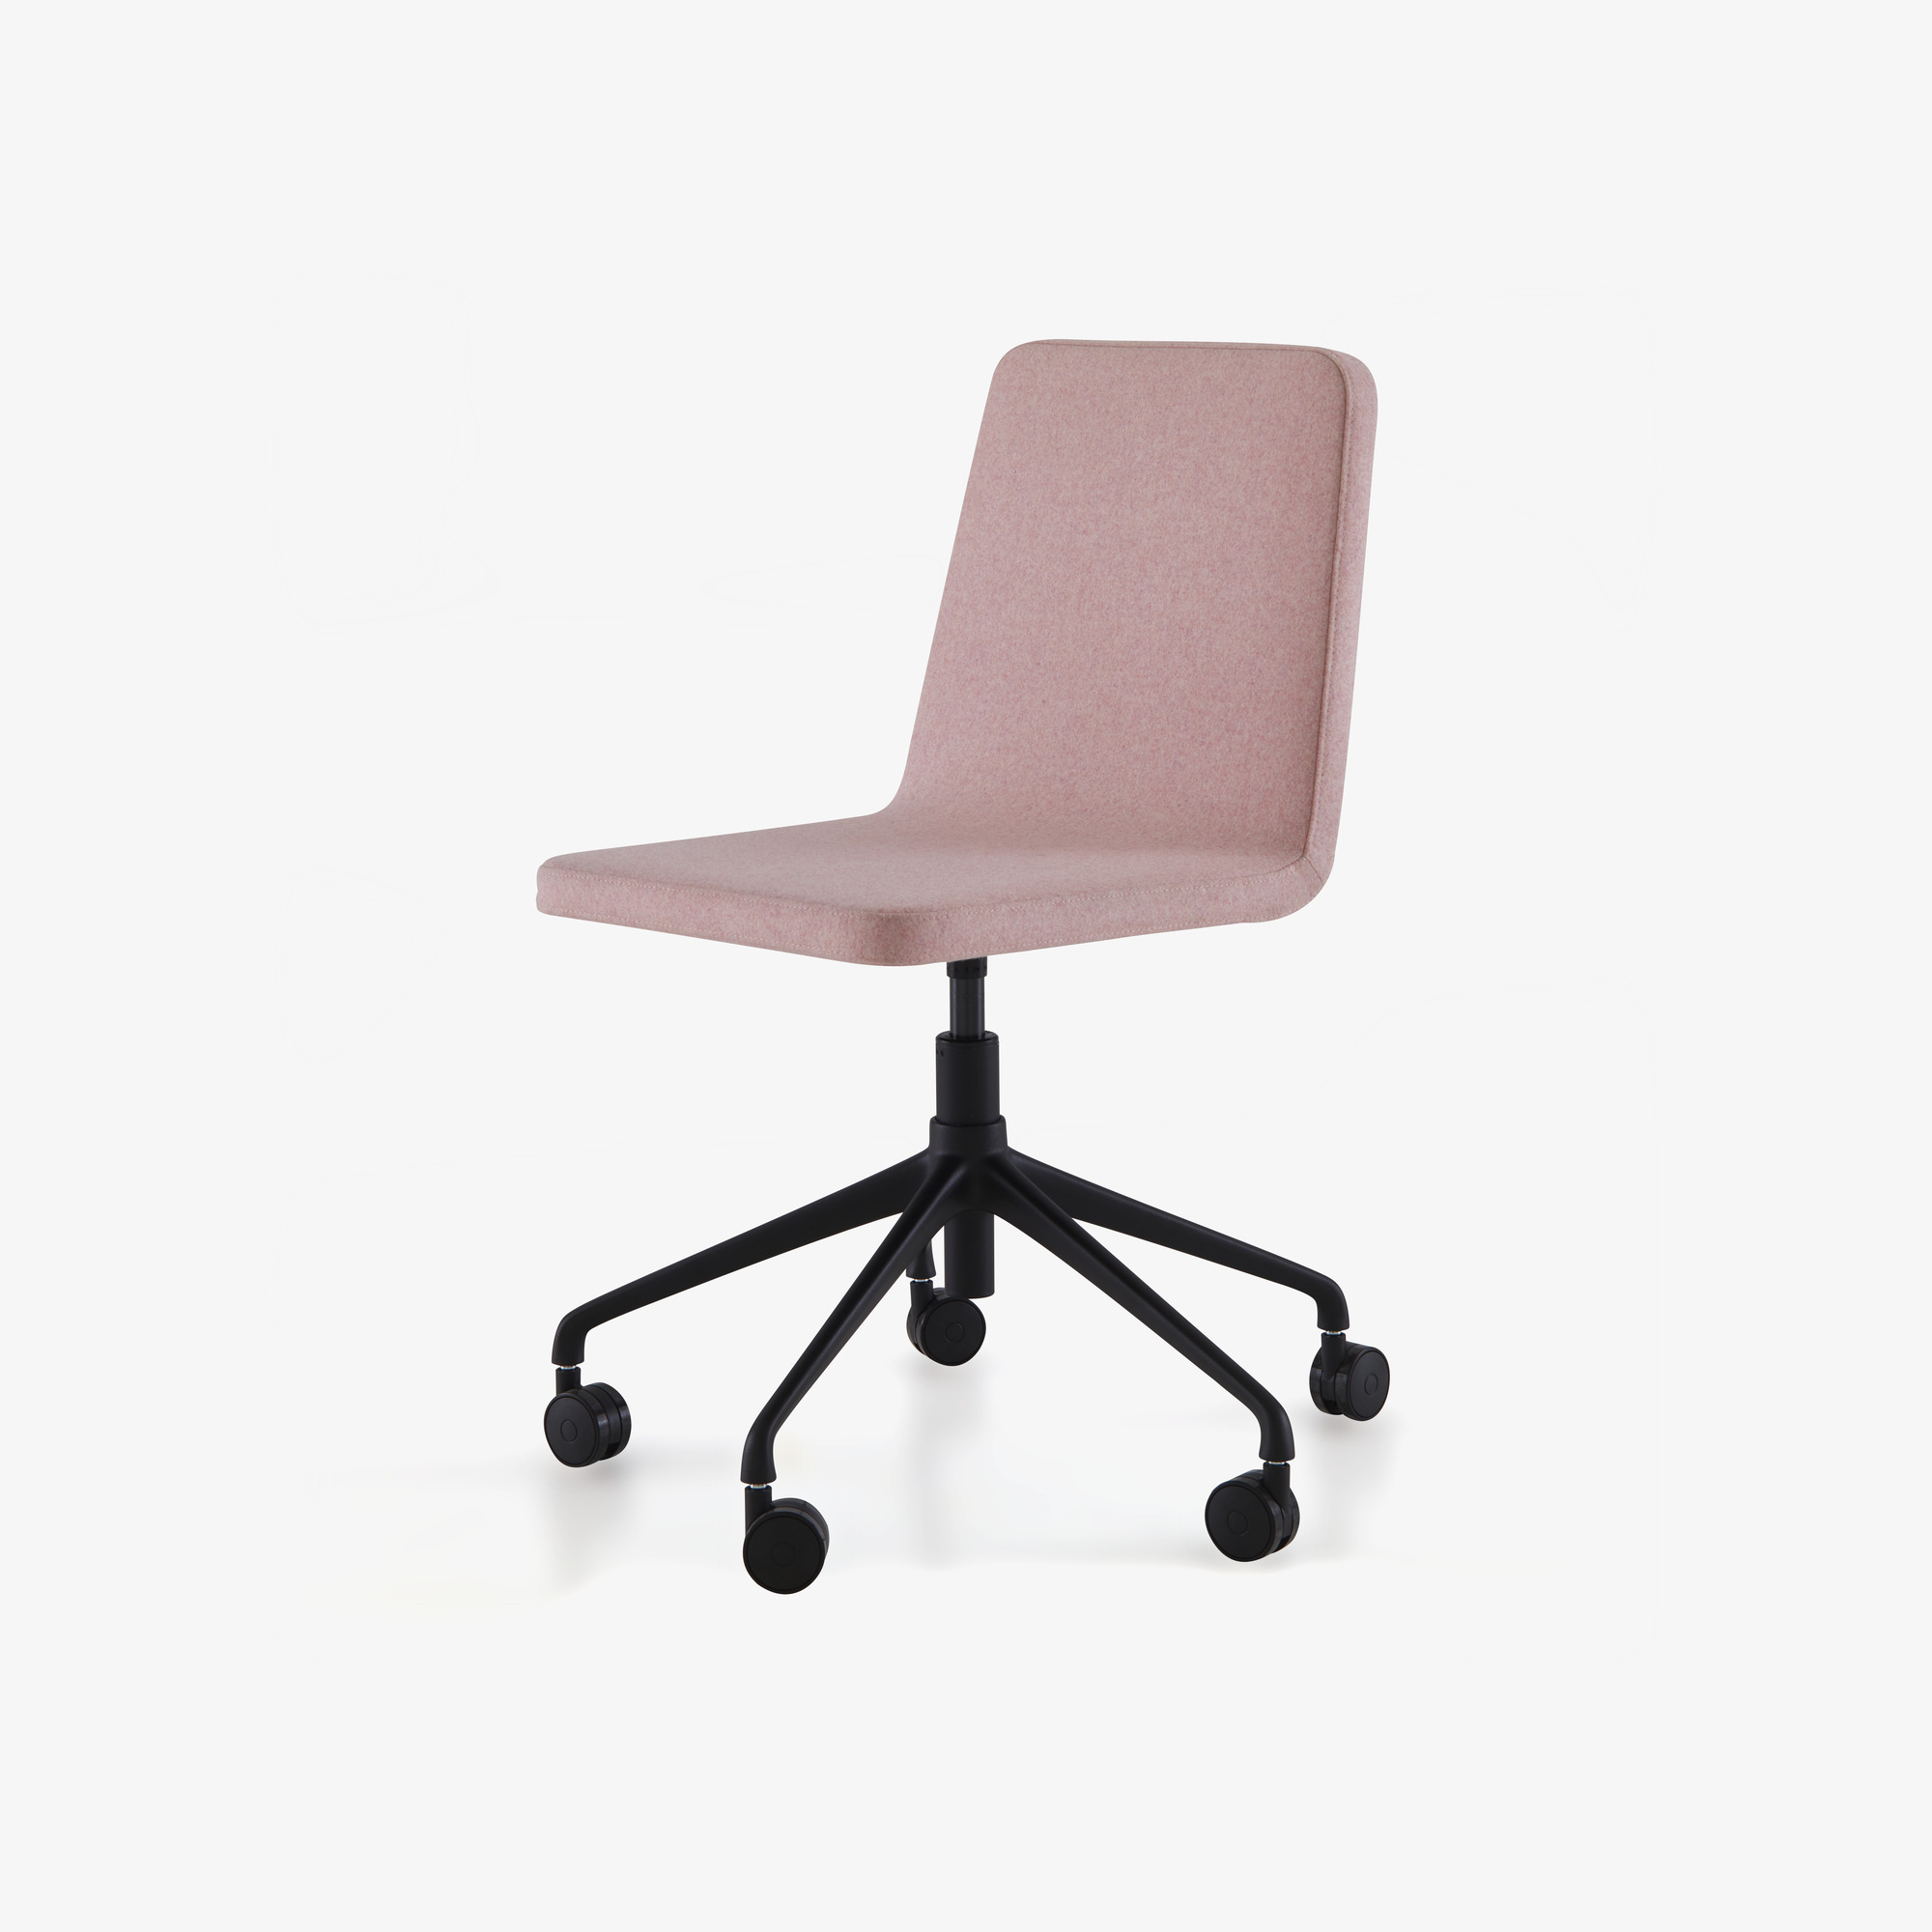 Image Desk chair set of feet with wheels 3